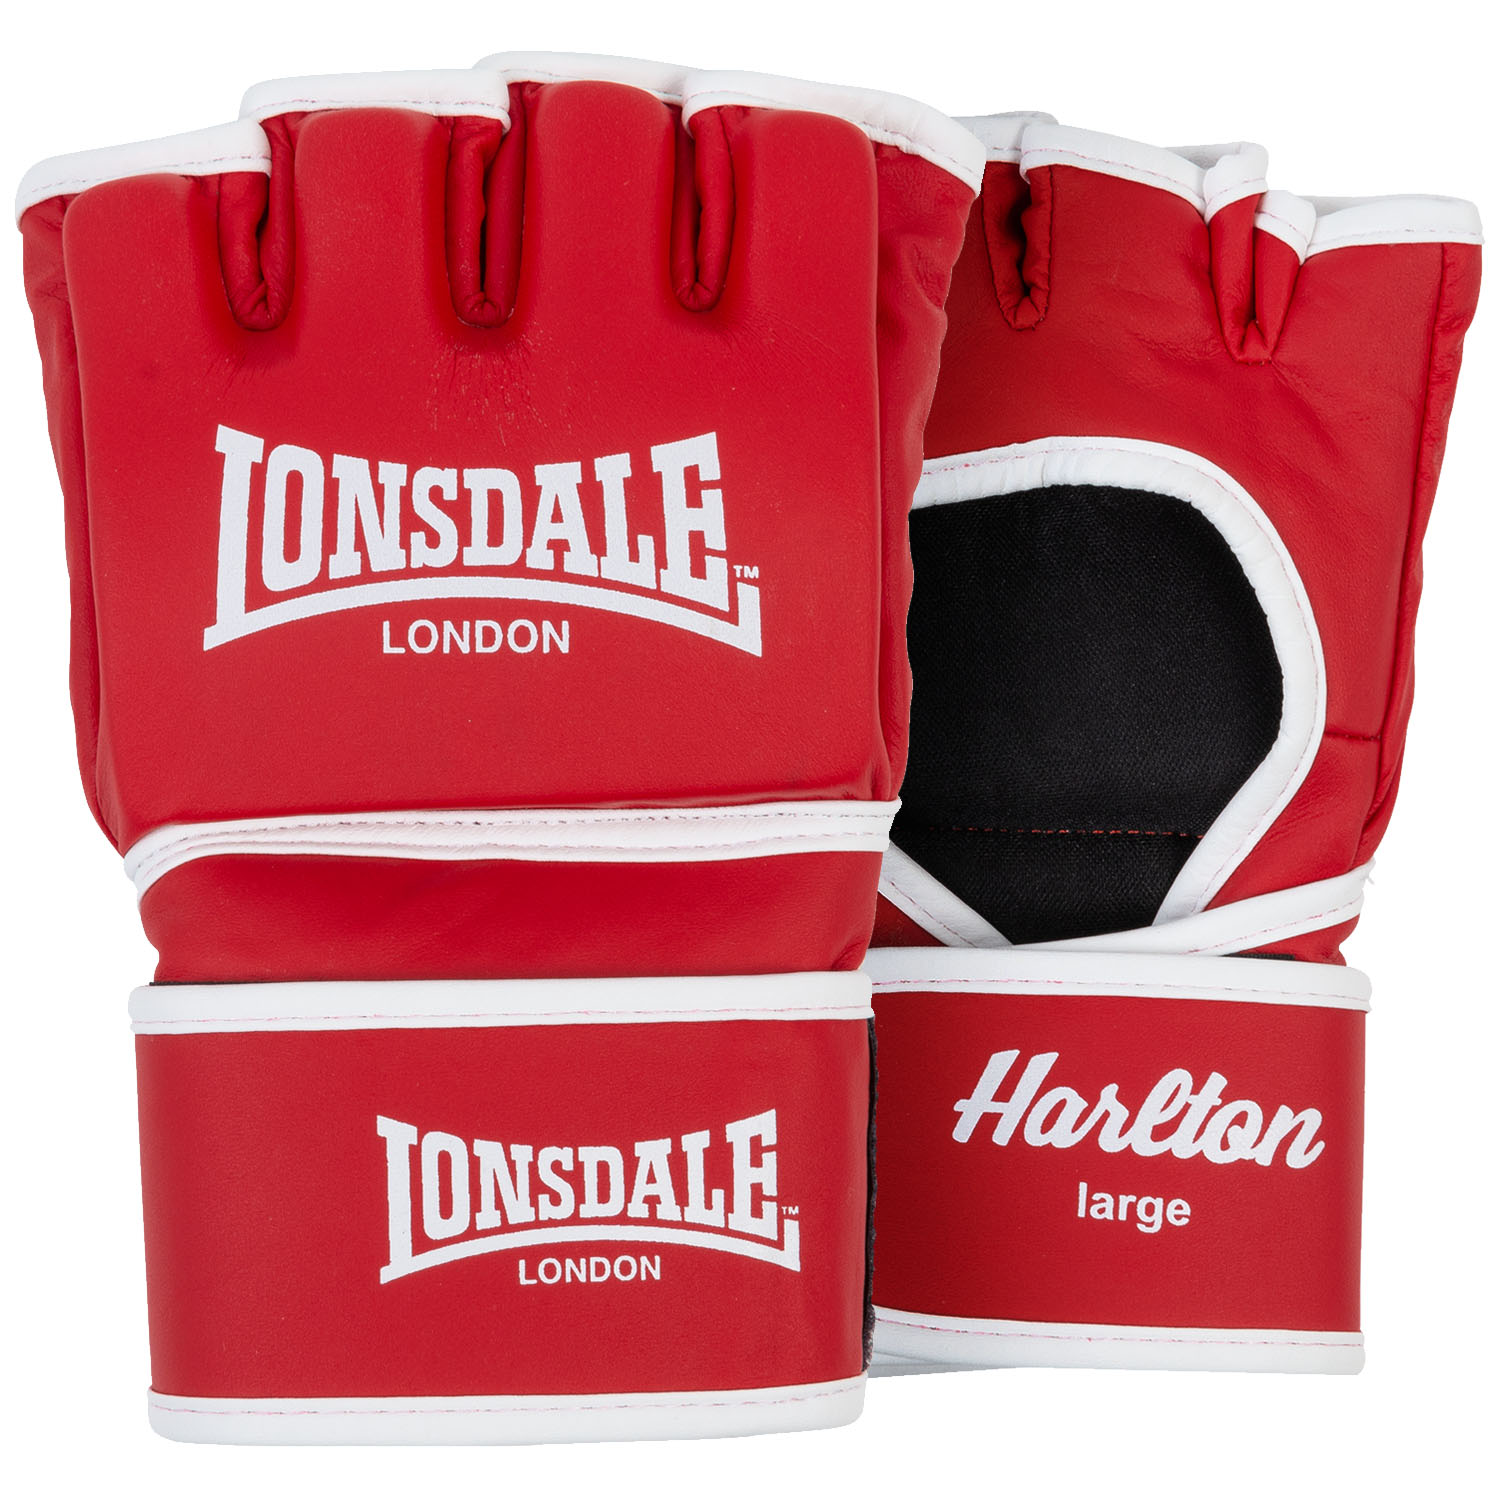 Lonsdale MMA Boxing Gloves, Harlton, rot, L